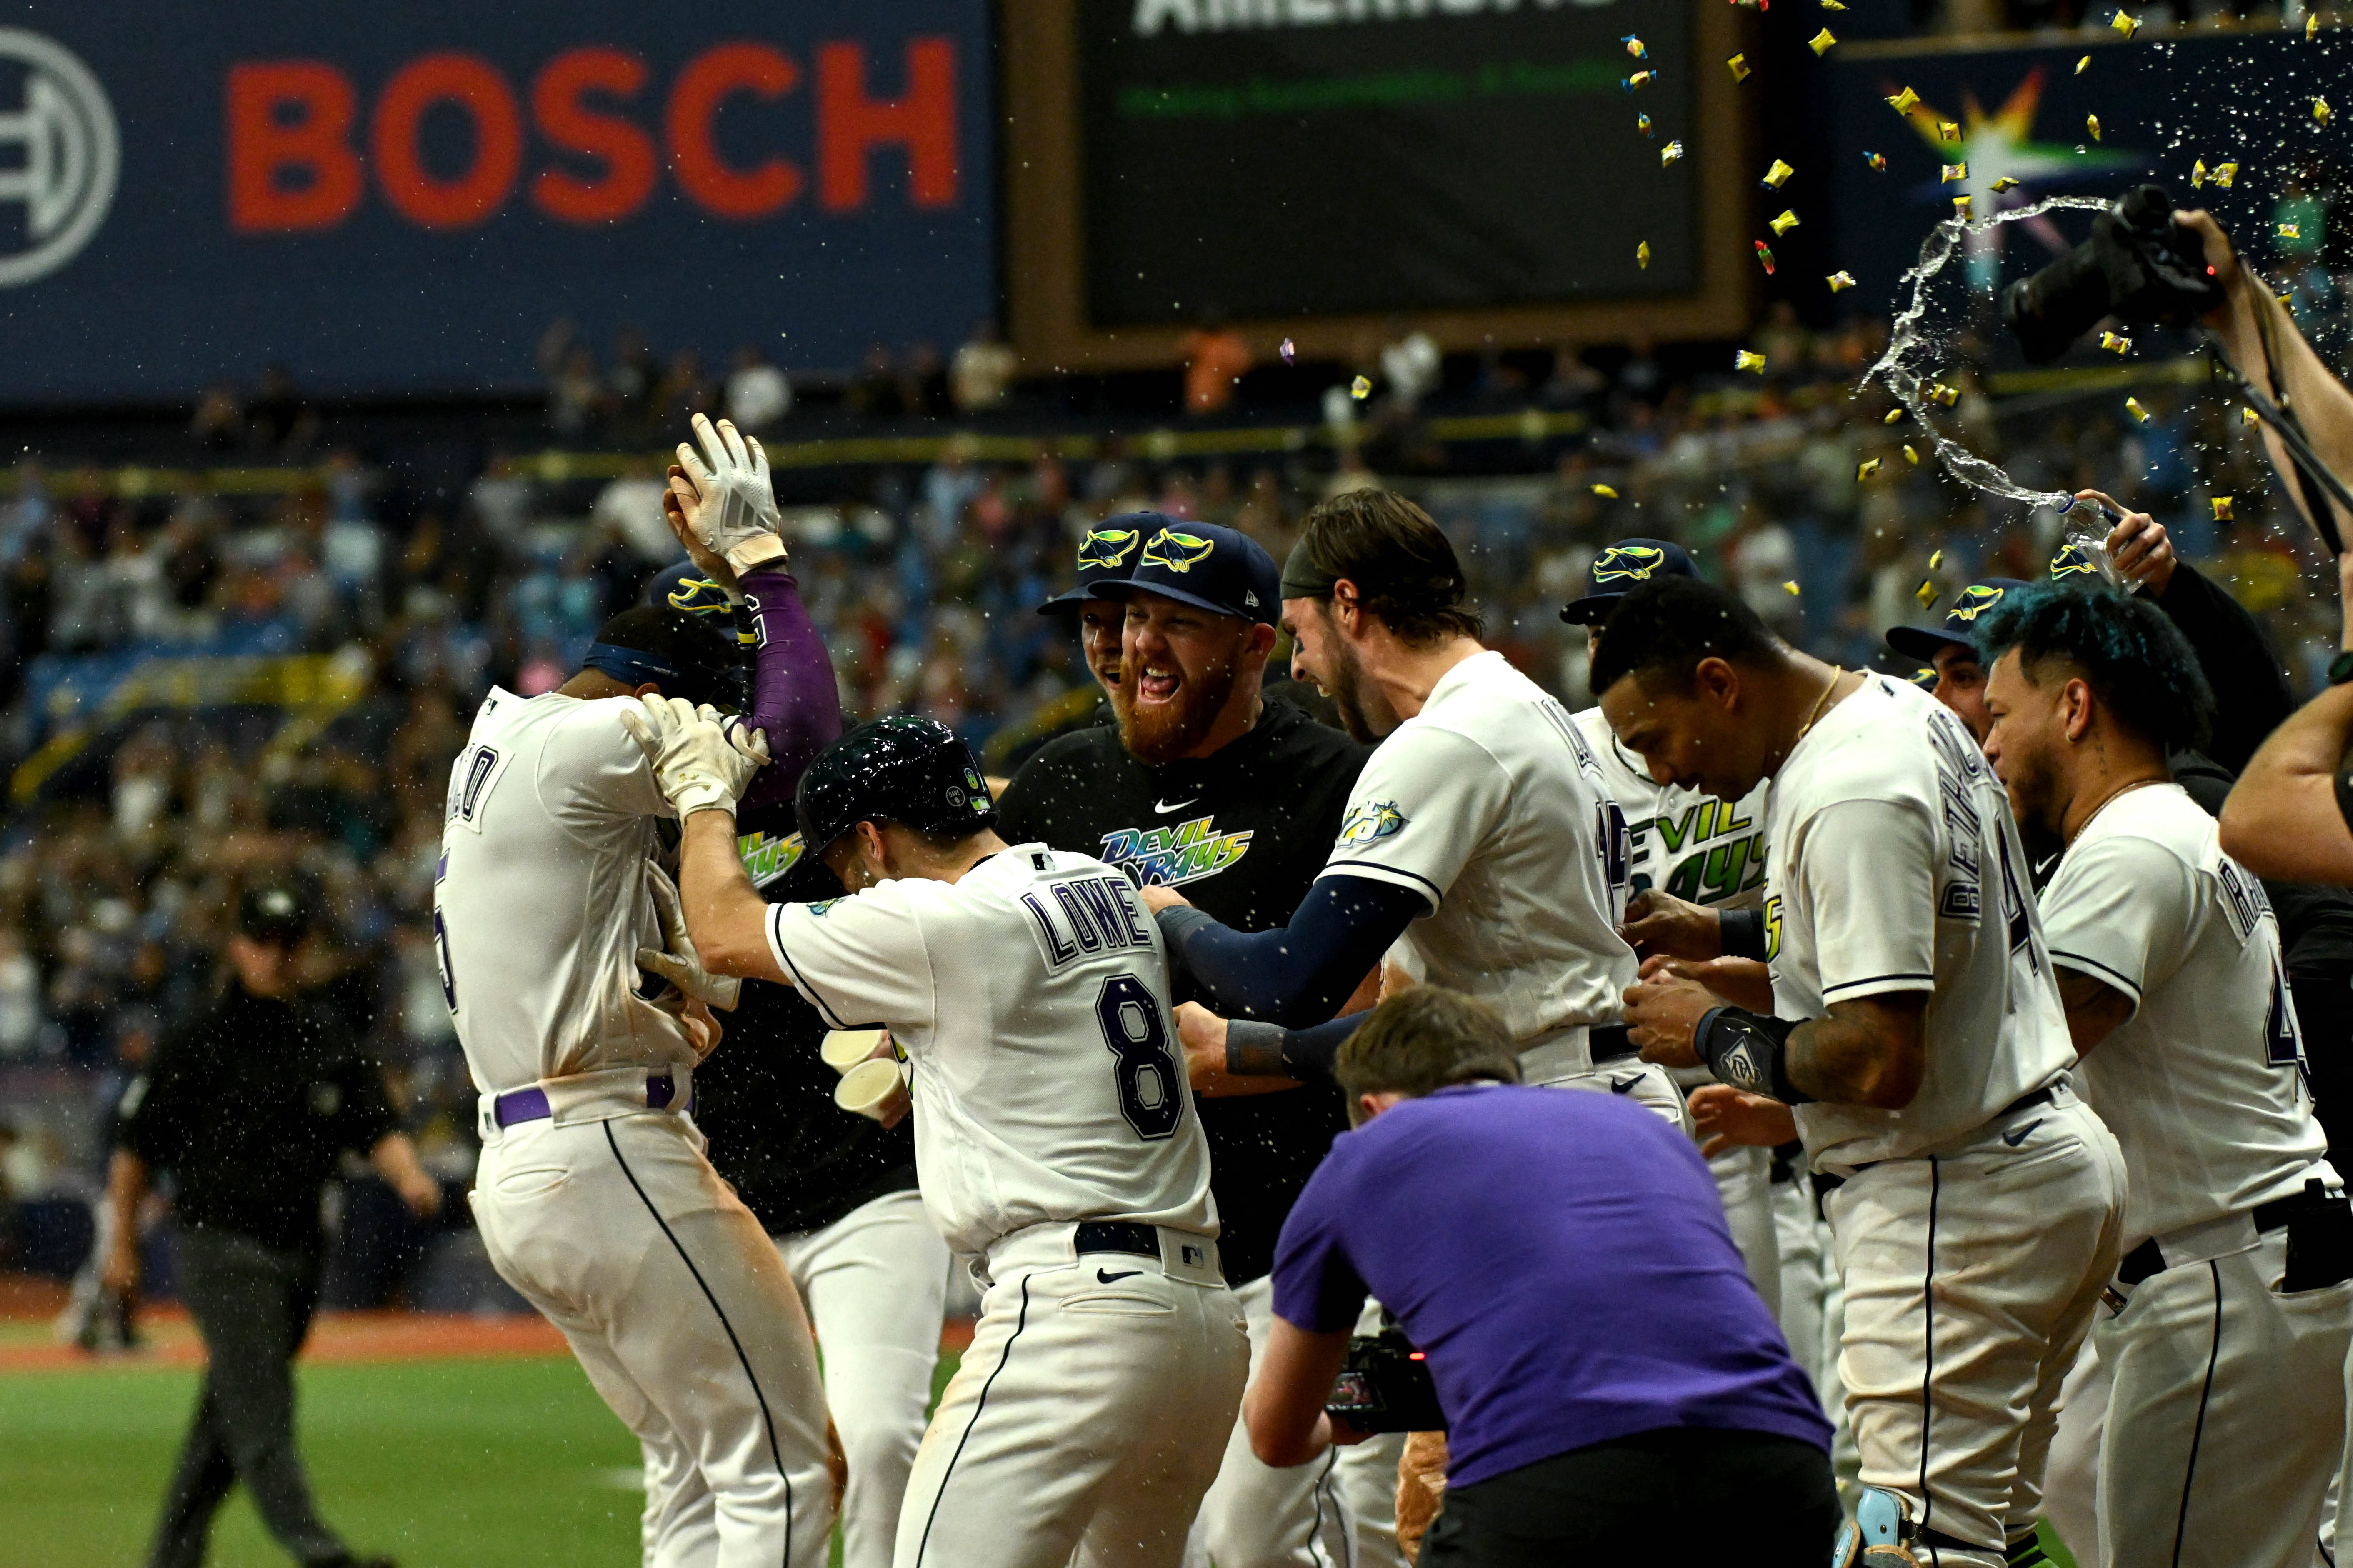 Rays' Ramirez delivers winning hit in 10th to beat Bucs 4-3